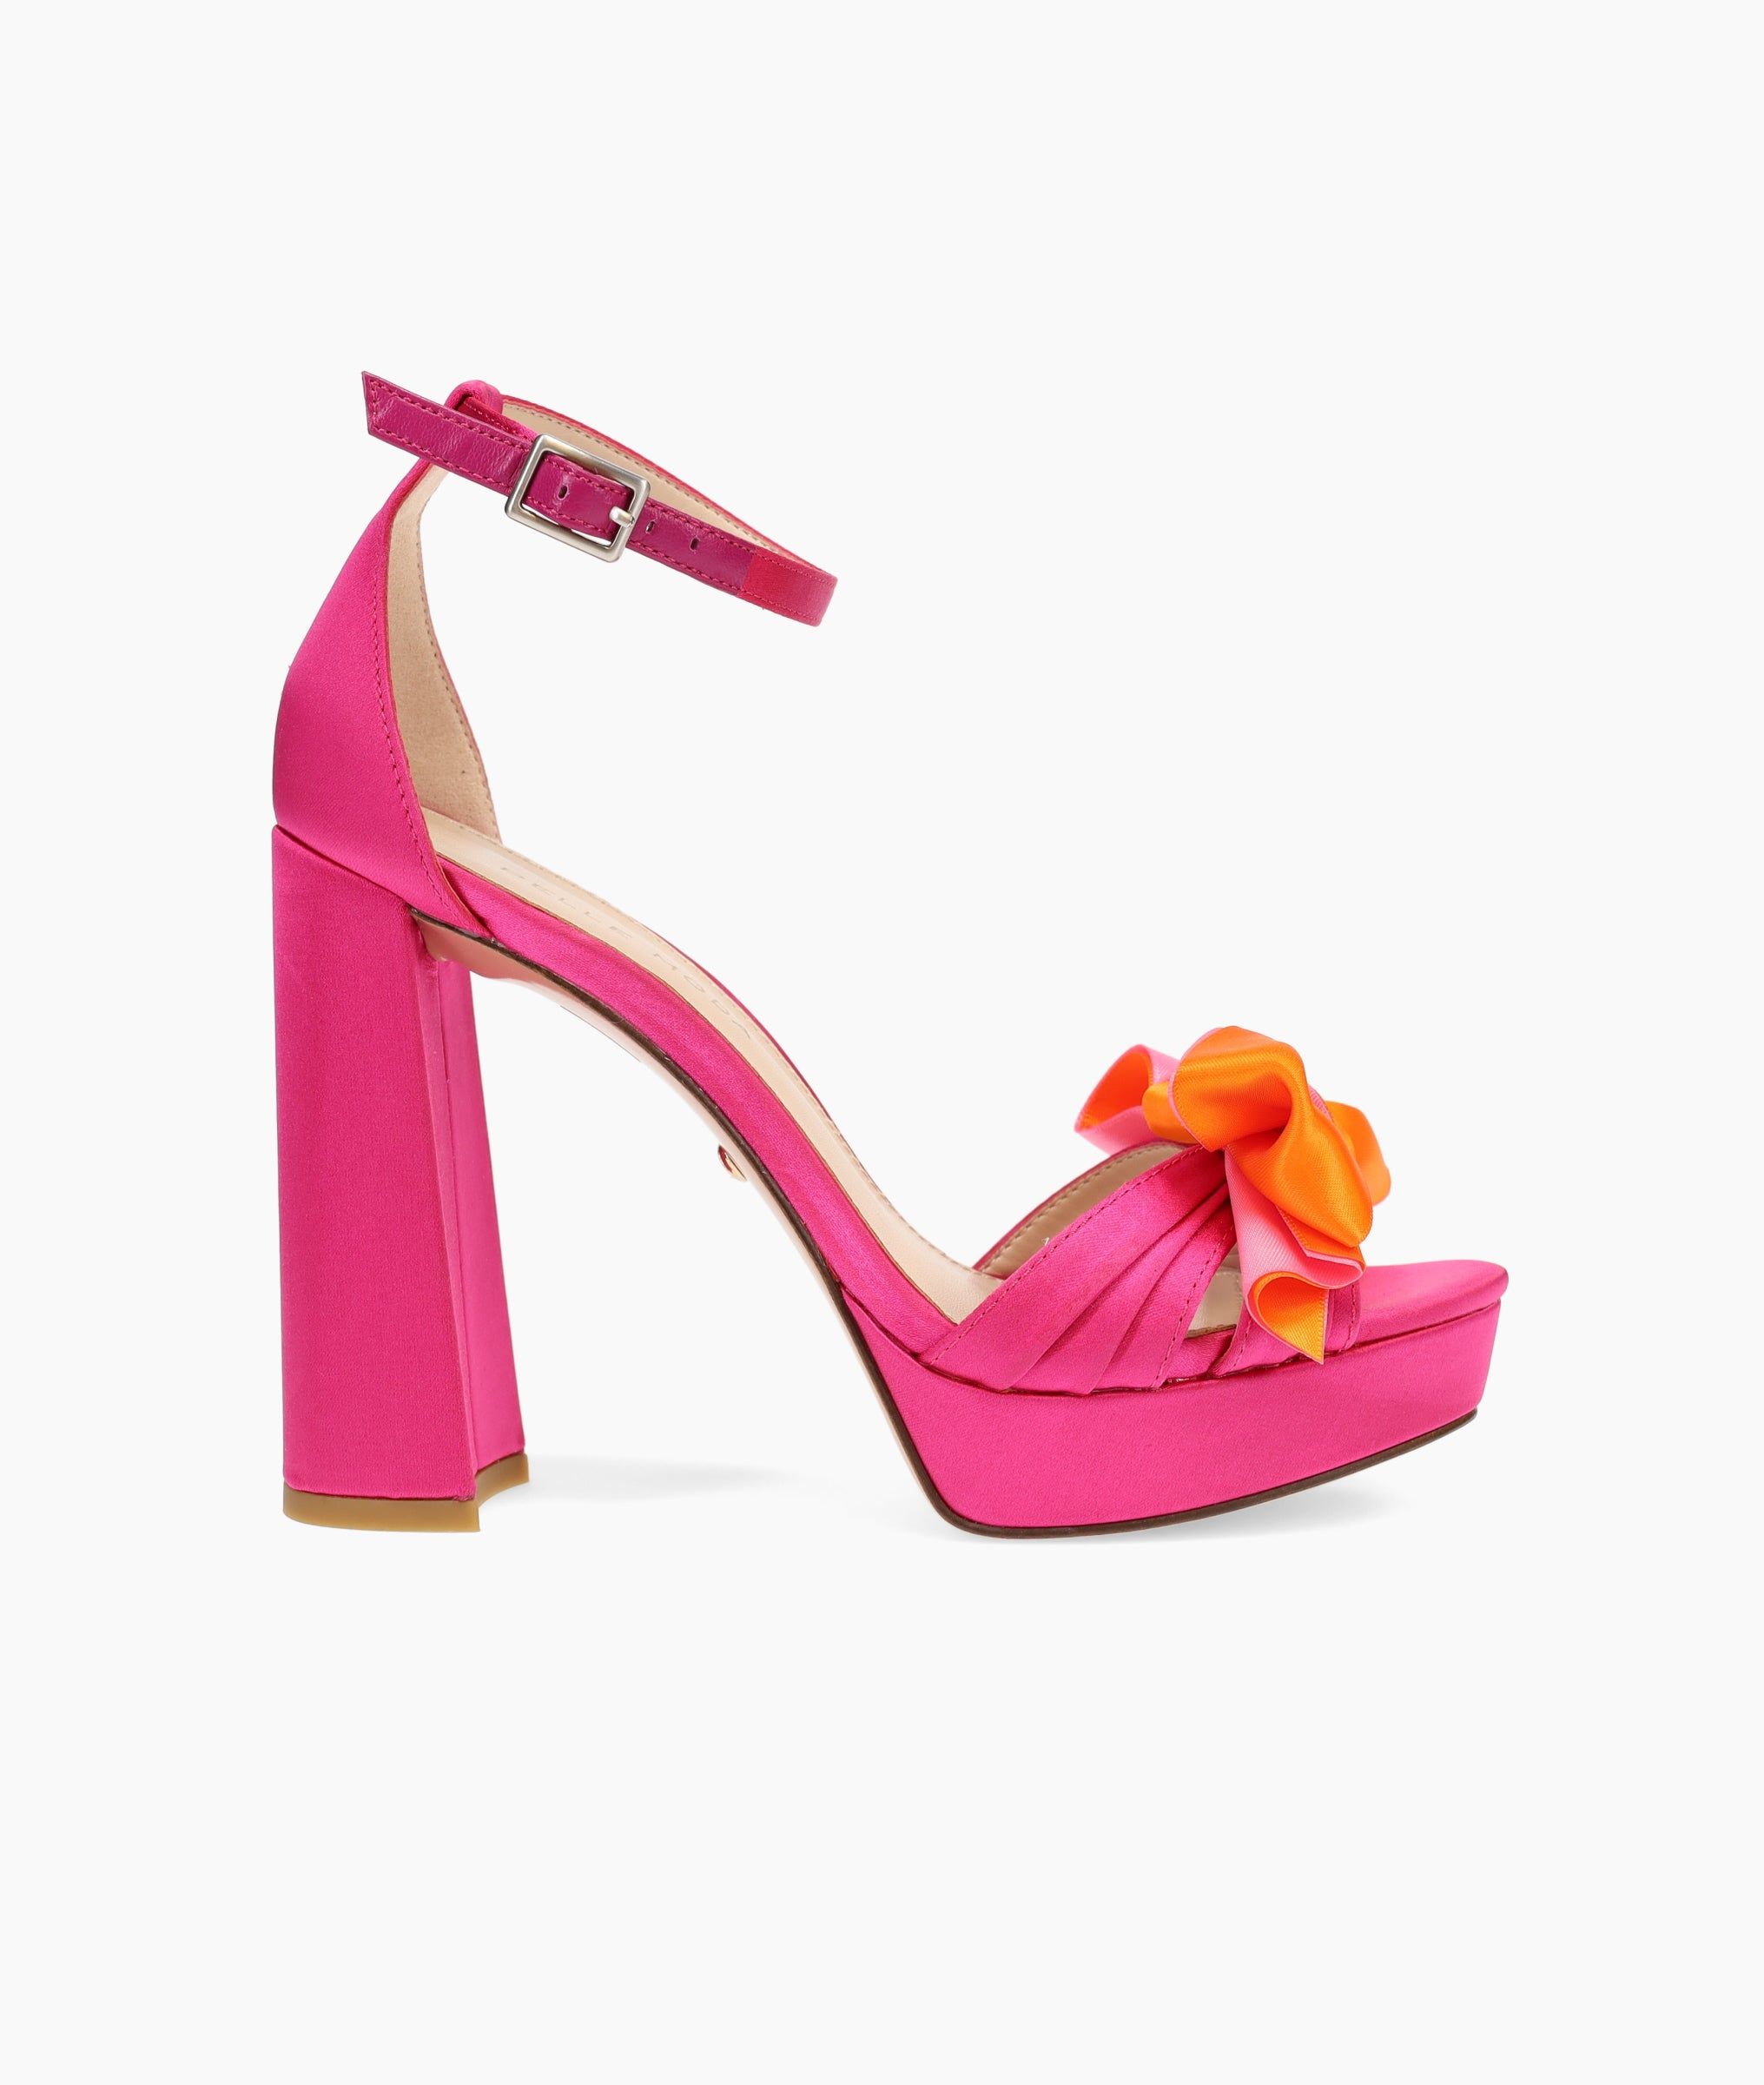 Shopping for Heels: What to Look for in a Good Pair of Stilettos - Heel  Candy Wraps